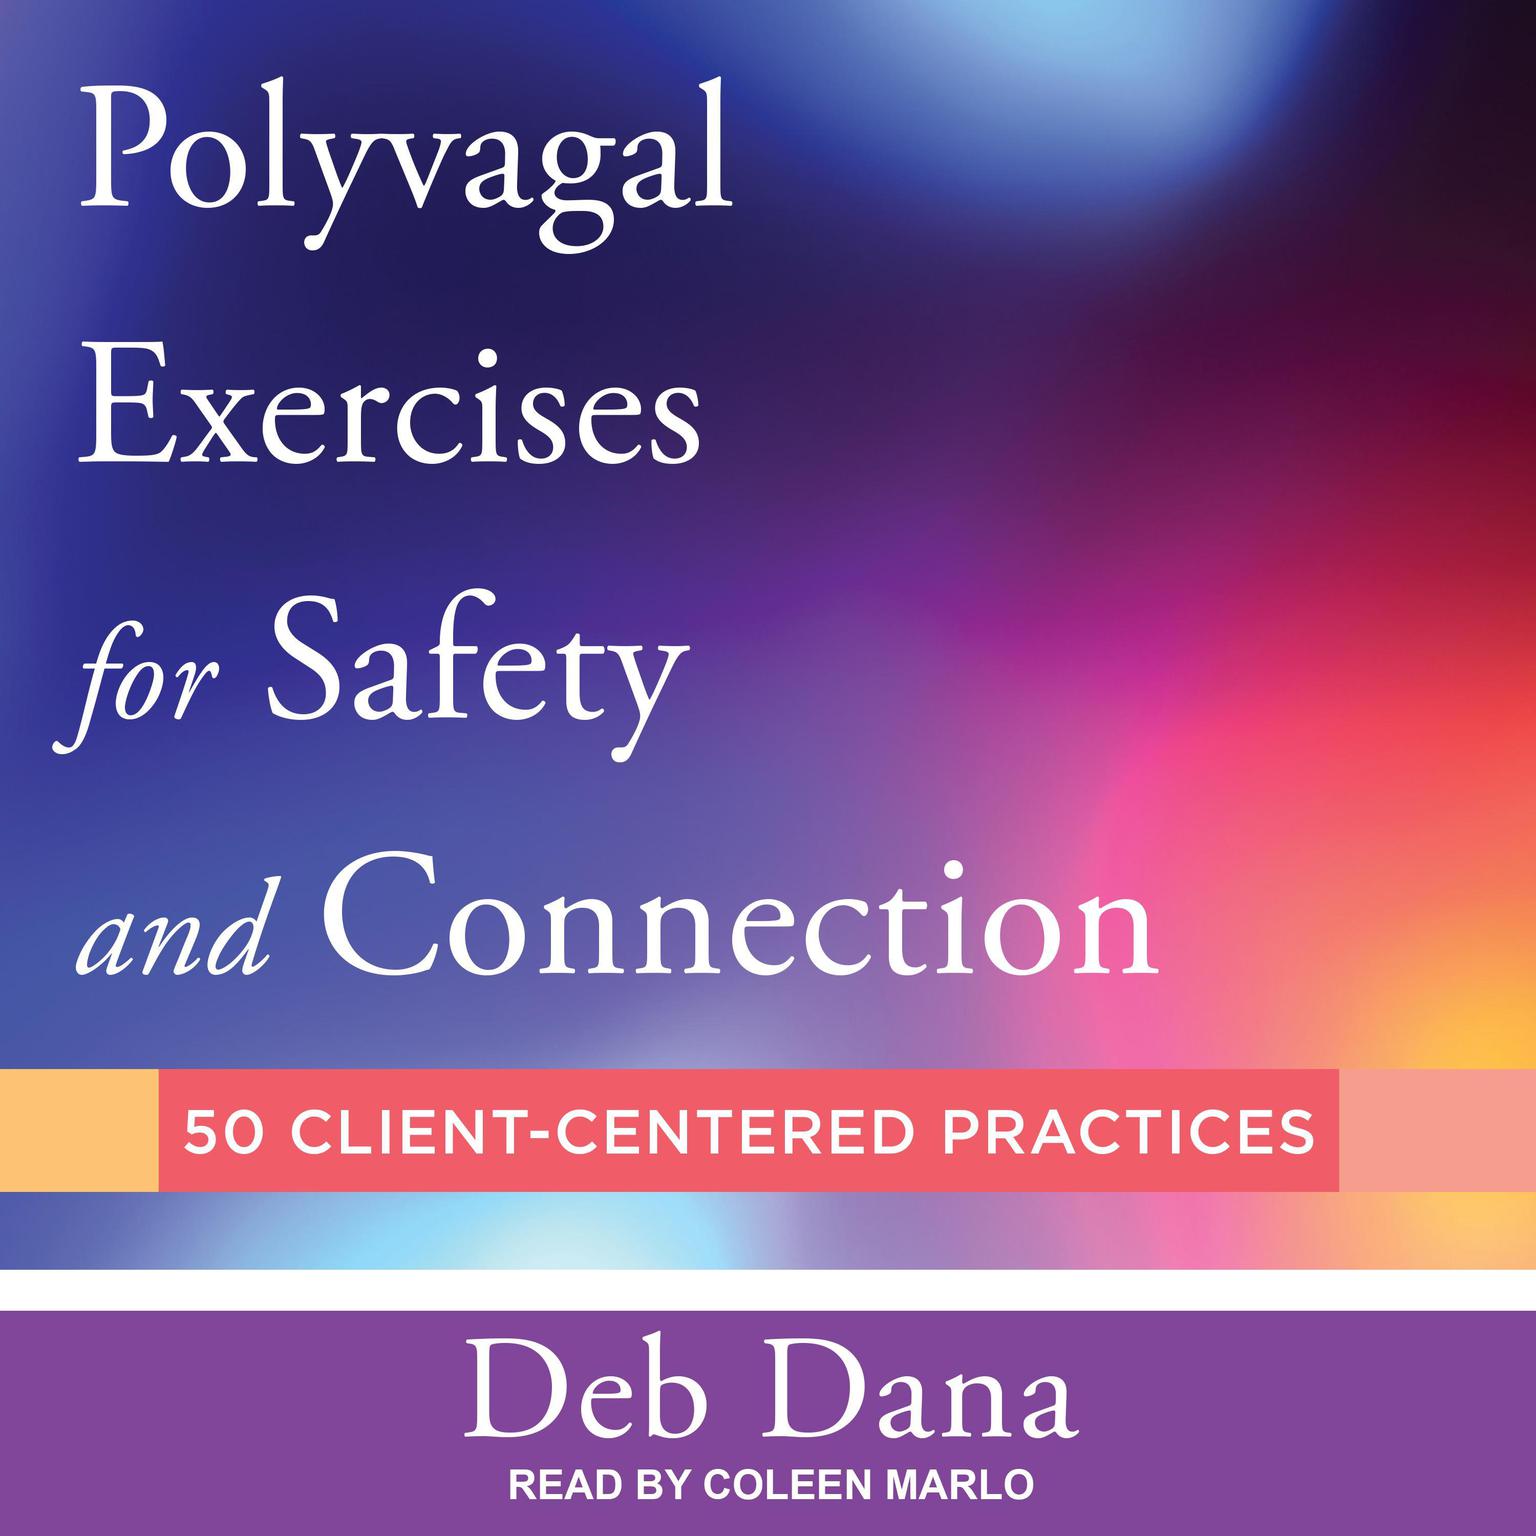 Polyvagal Exercises for Safety and Connection: 50 Client-Centered Practices Audiobook, by Deb Dana